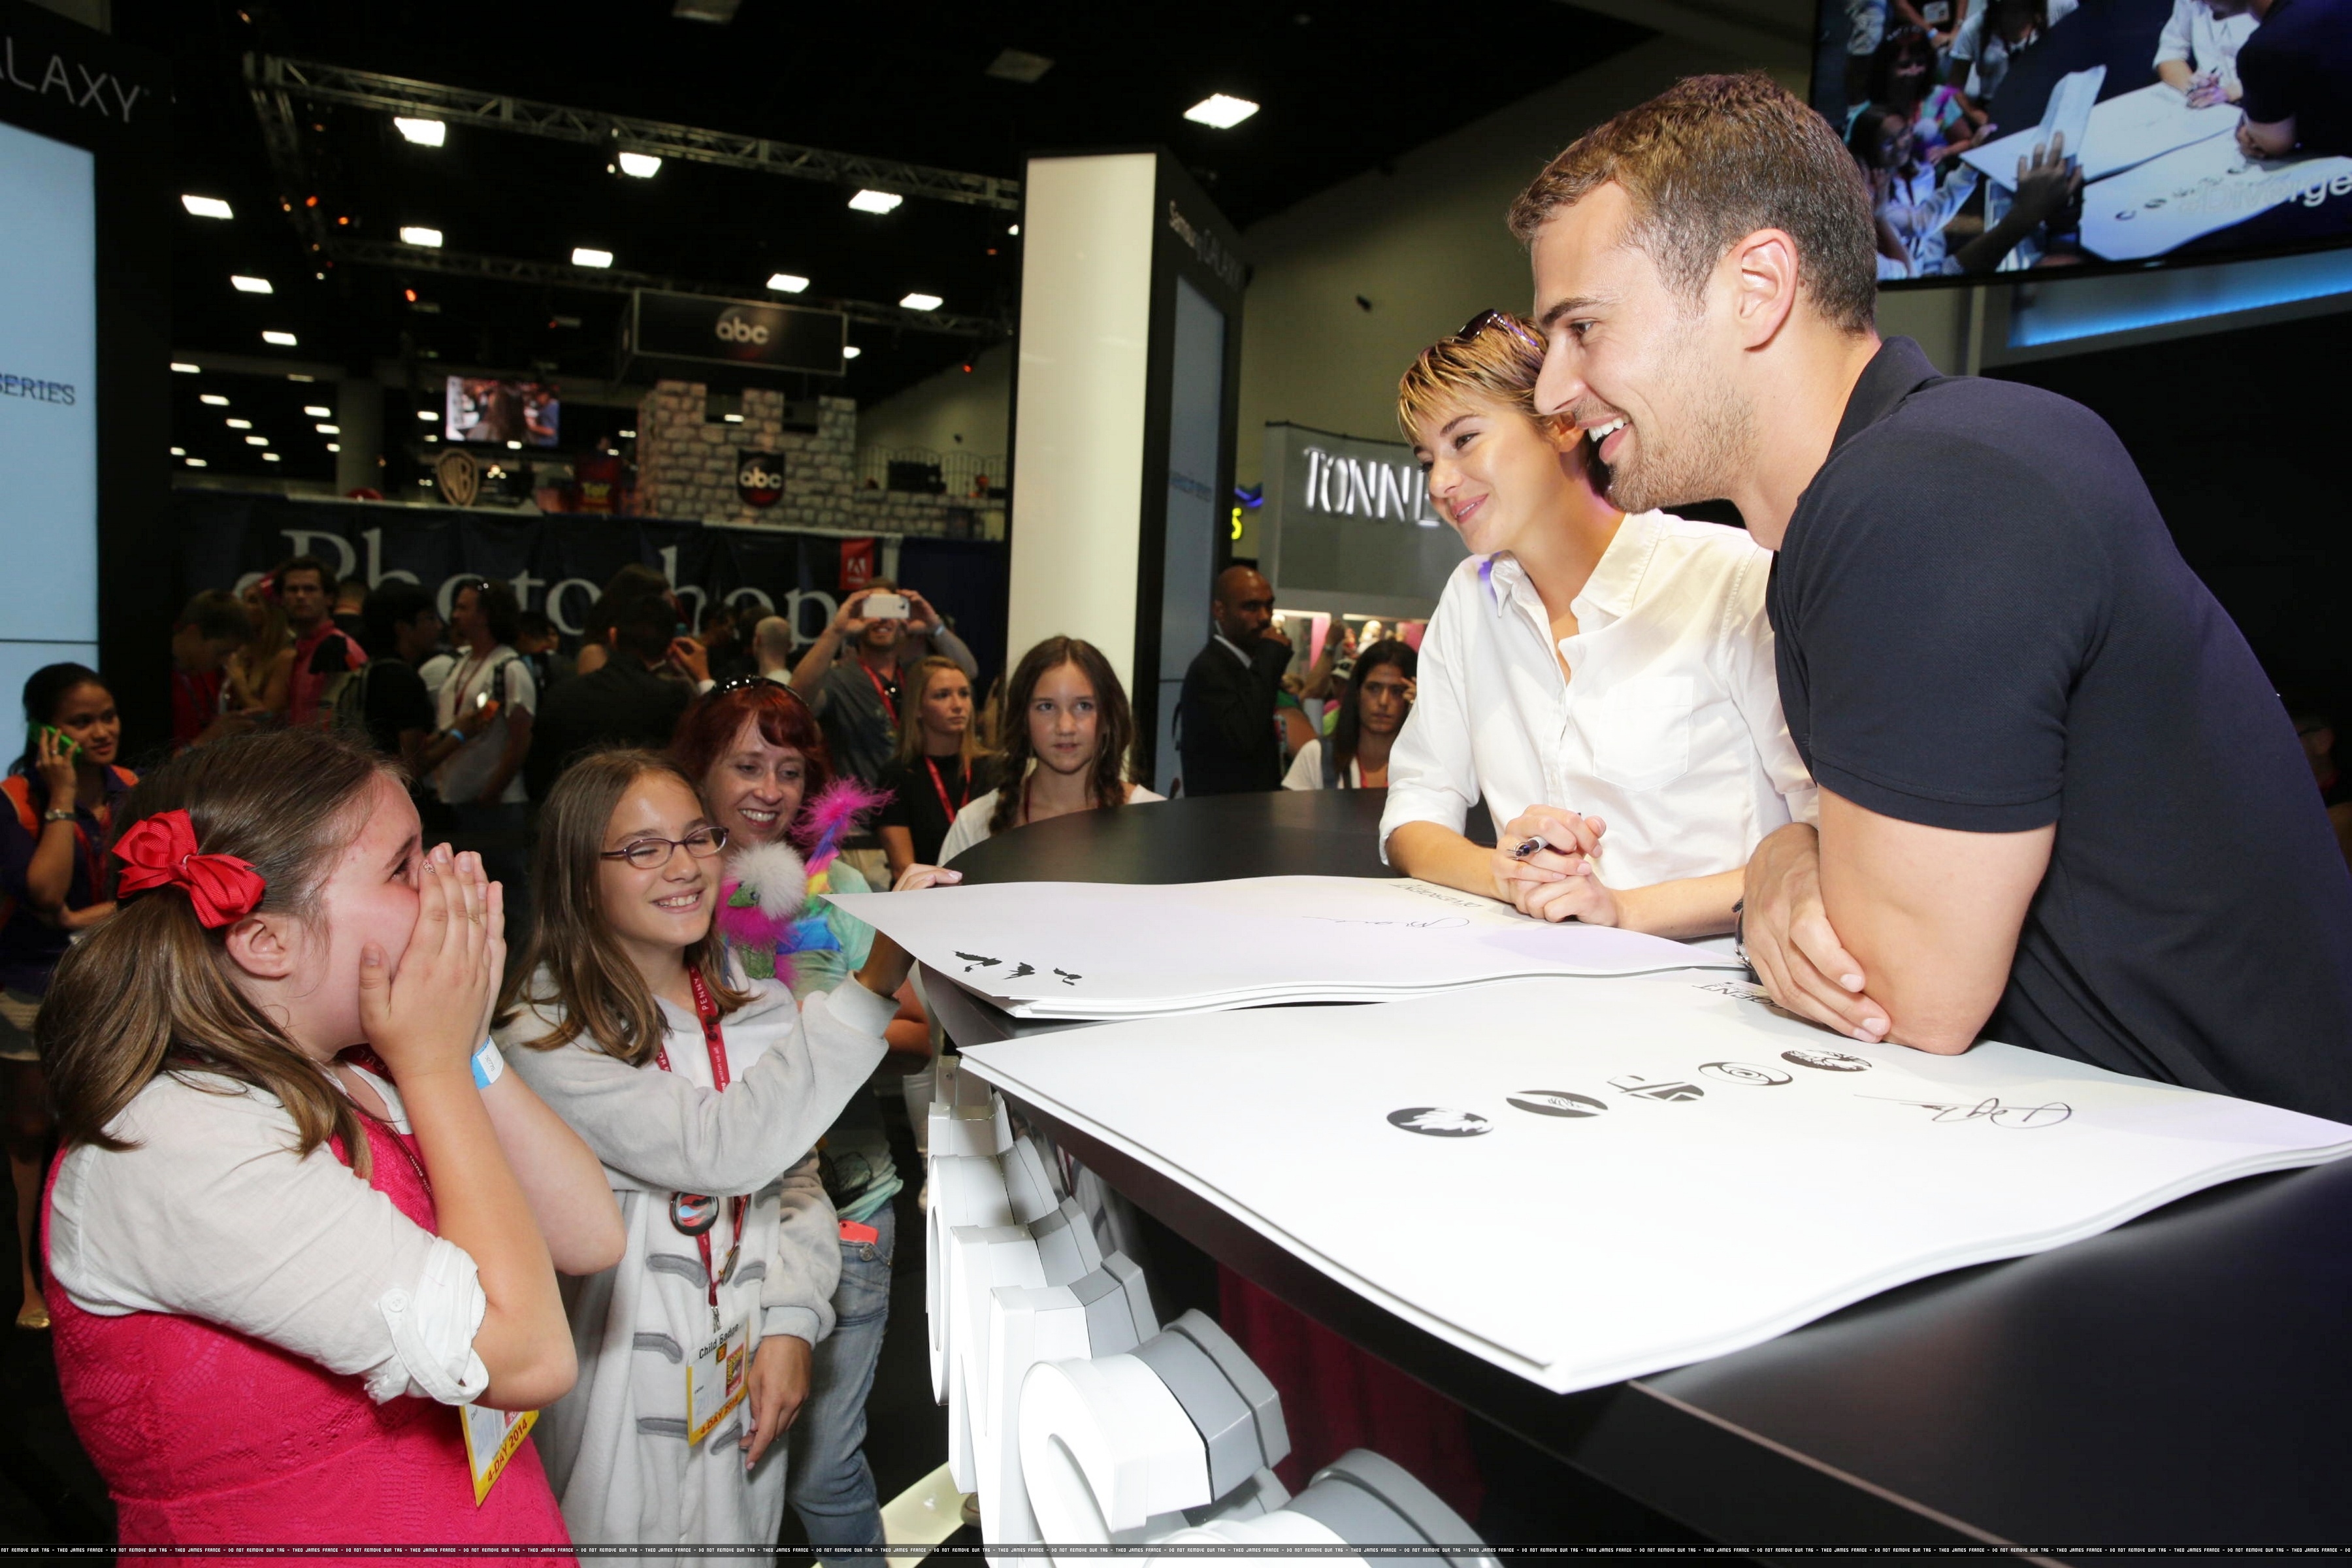 Video: ‘Insurgent’ Theo James & Shailene Woodley Comic Con 2014 Talent Signing